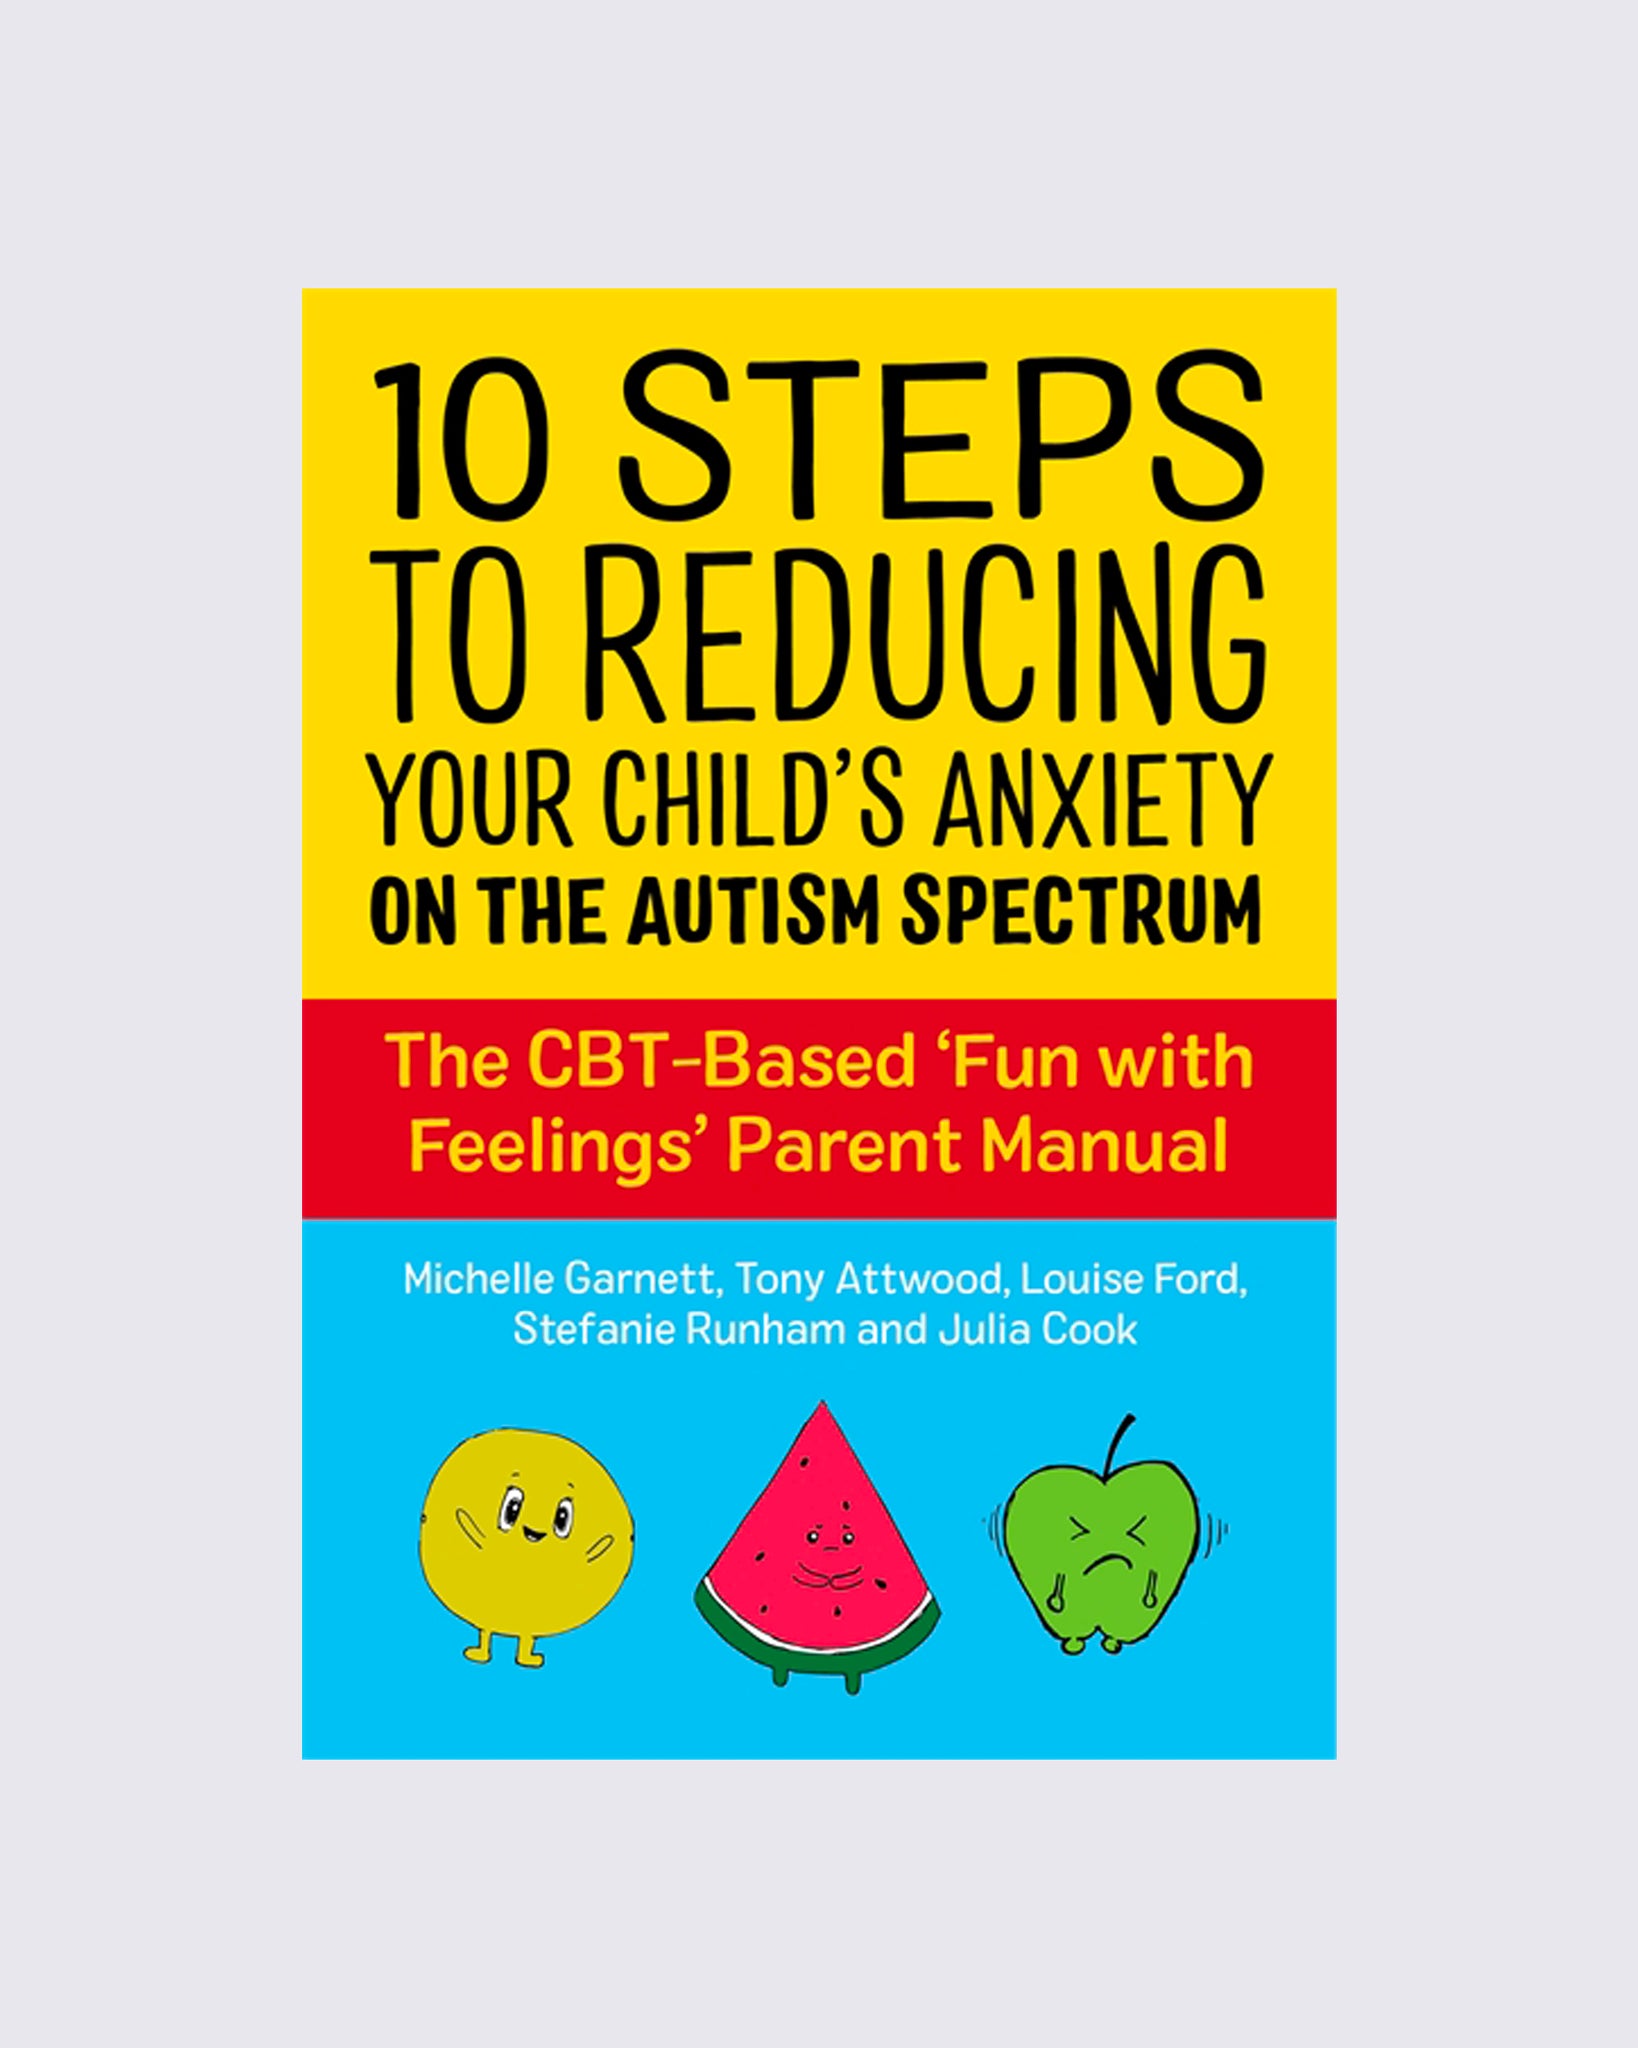 10 Steps to Reducing Your Child's Anxiety on the Autism Spectrum: The CBT-Based 'Fun with Feelings' Parent Manual